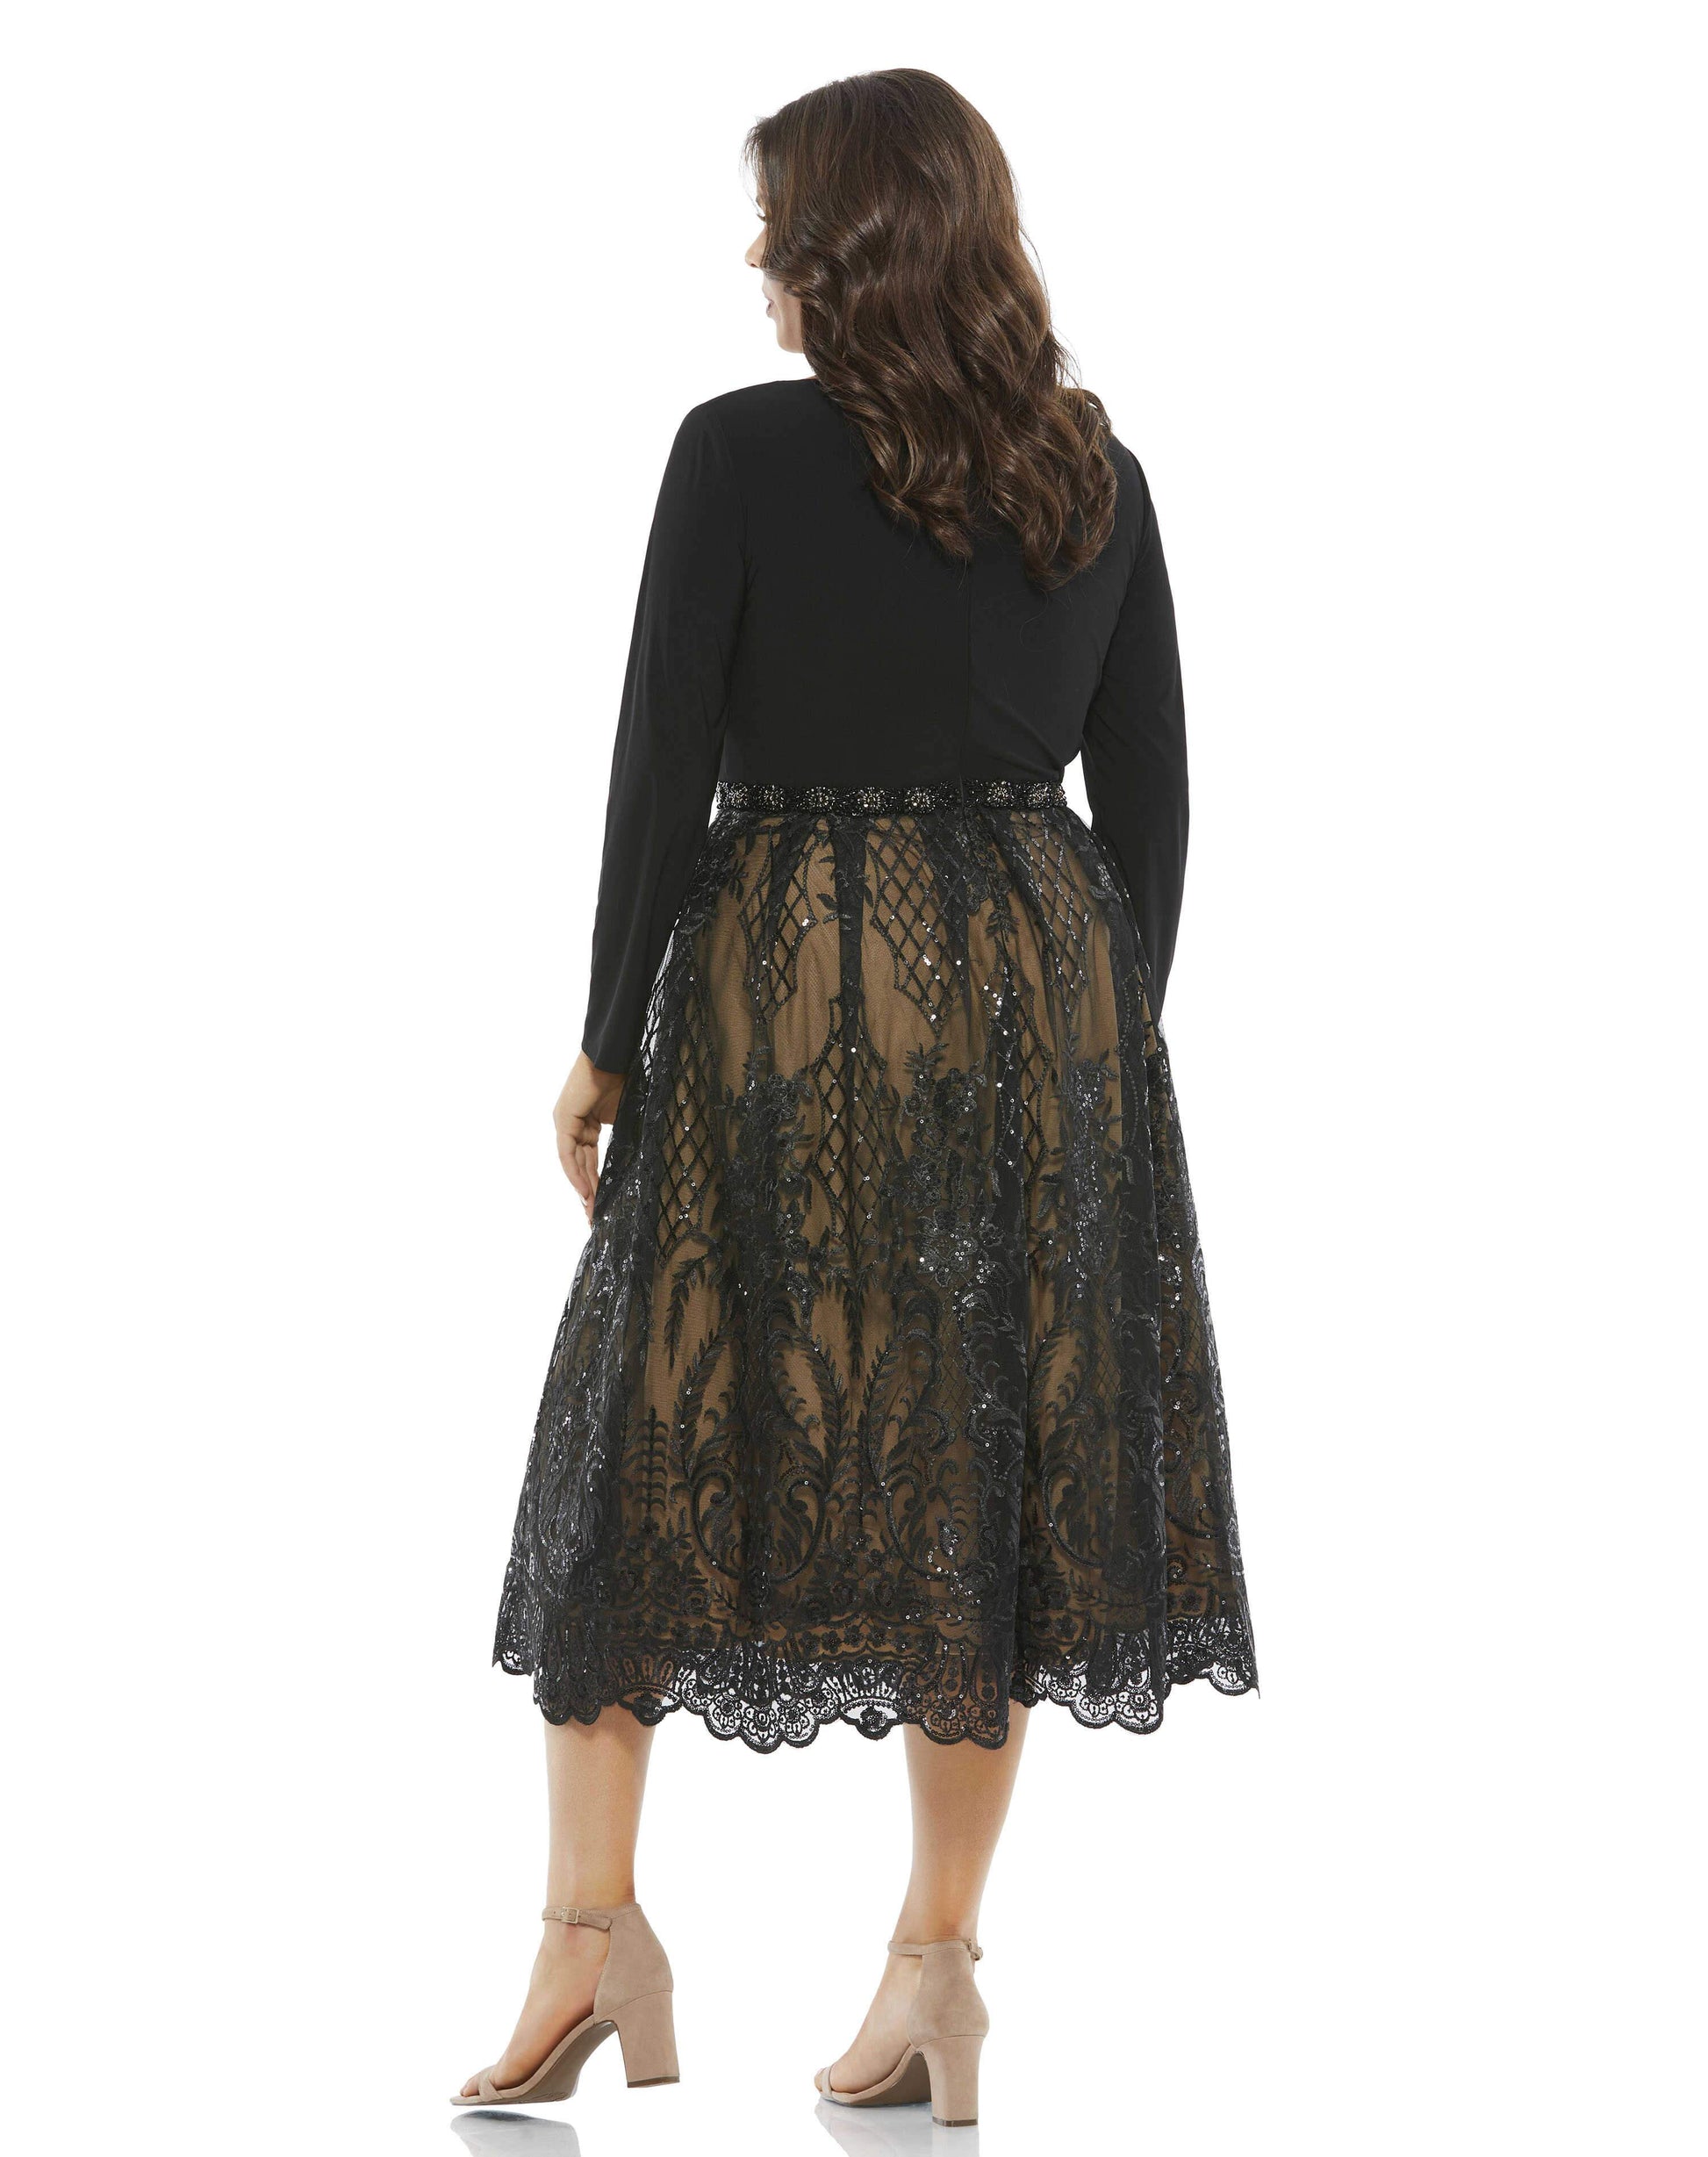 This chic cocktail dress makes a breathtaking look for special occasions. The mid-length dress opens with a minimalist jersey bodice cut with a pretty bateau neckline. An ornate beaded belt connects the top to an embroidered skirt stitched with lattices o